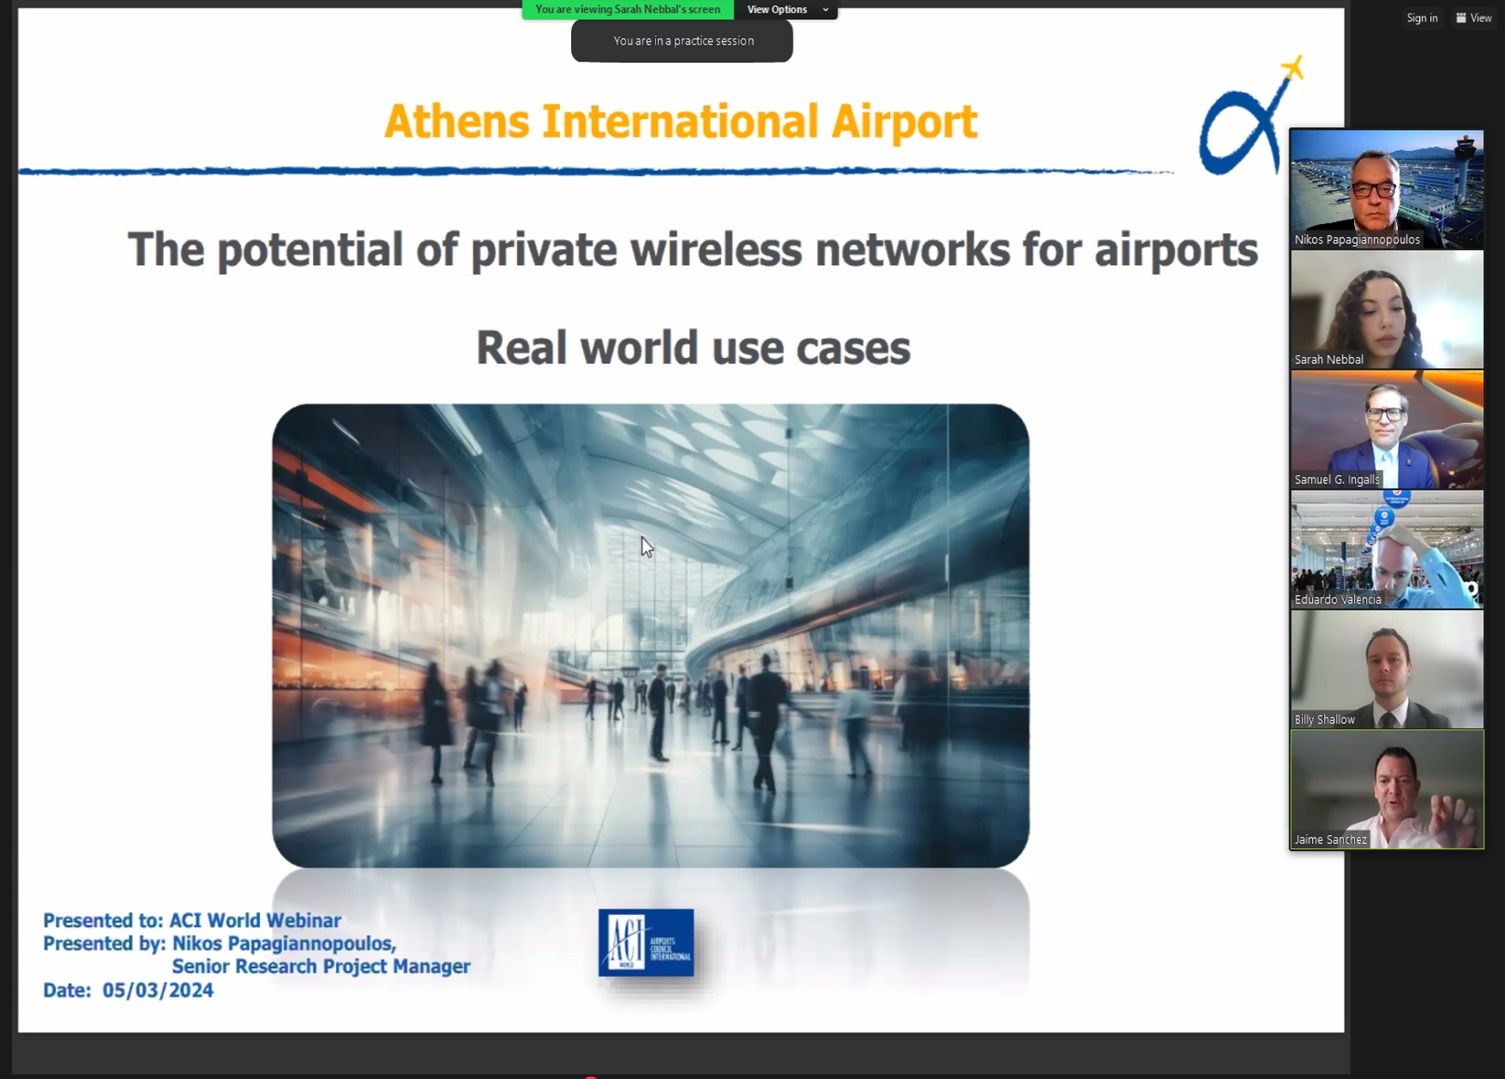 Use case presentation at ACI World Webinar for Private Wireless Networks.